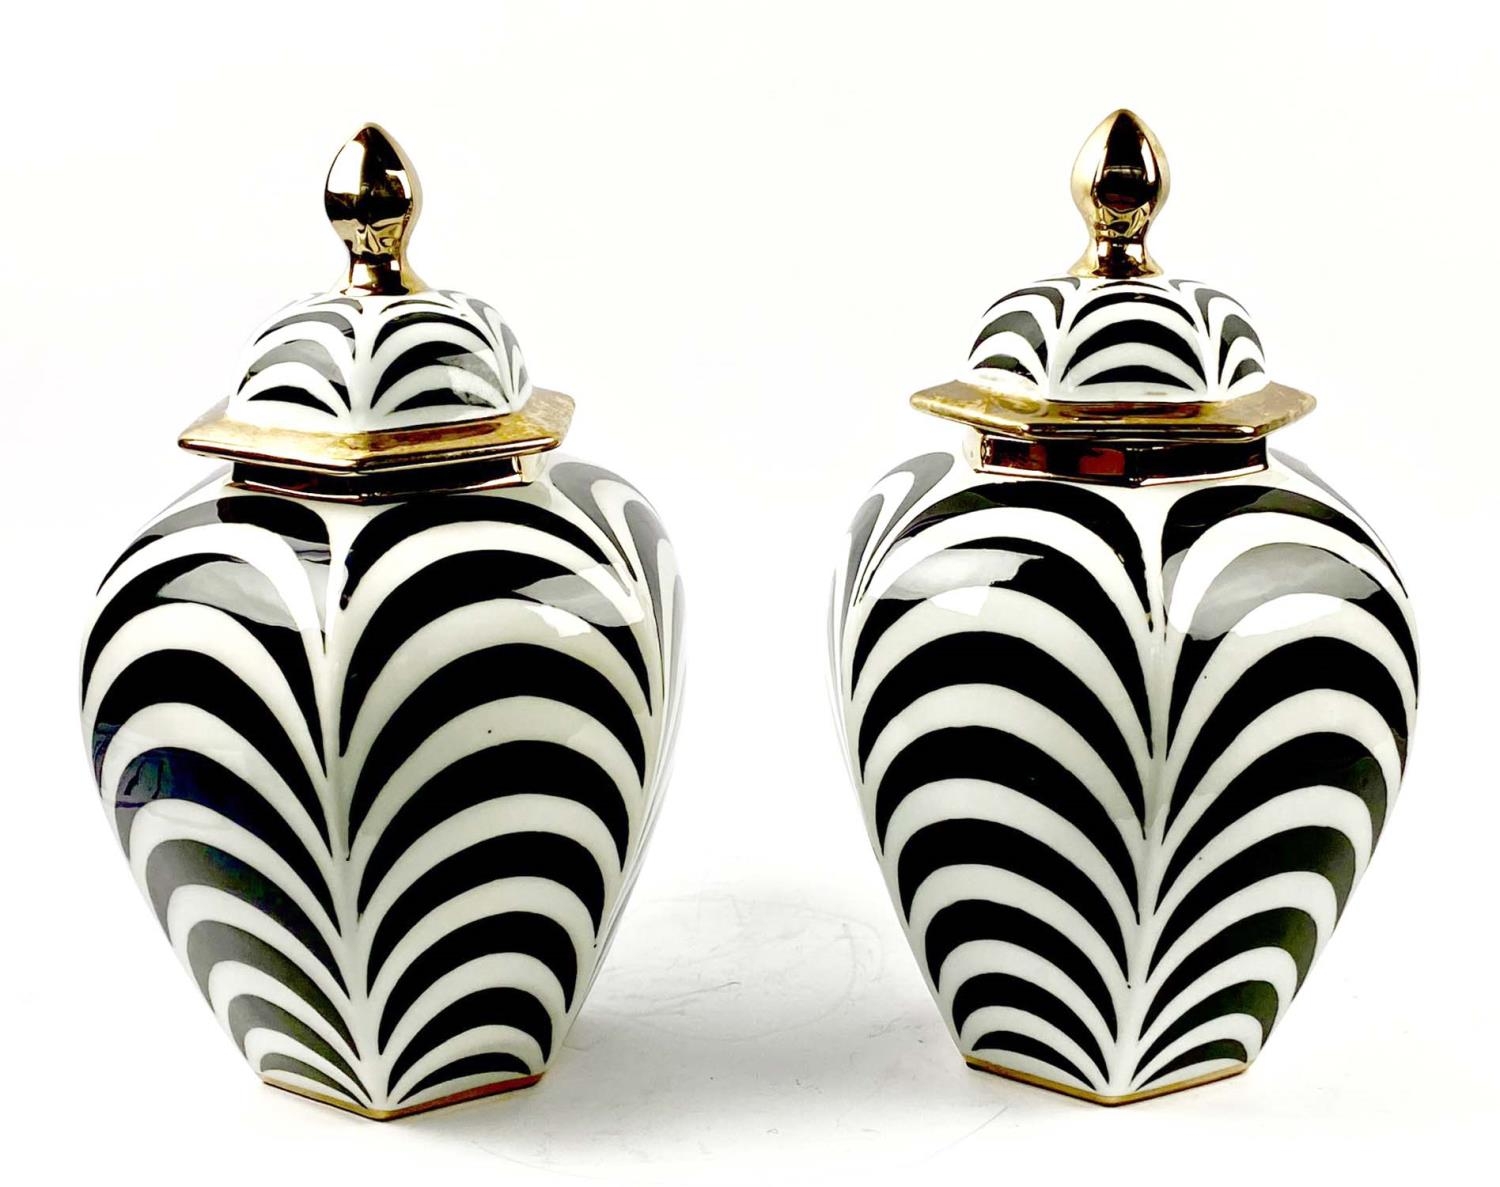 GINGER JARS, a pair, glazed ceramic with black and white decoration, gilt accents, 40cm high, 26cm